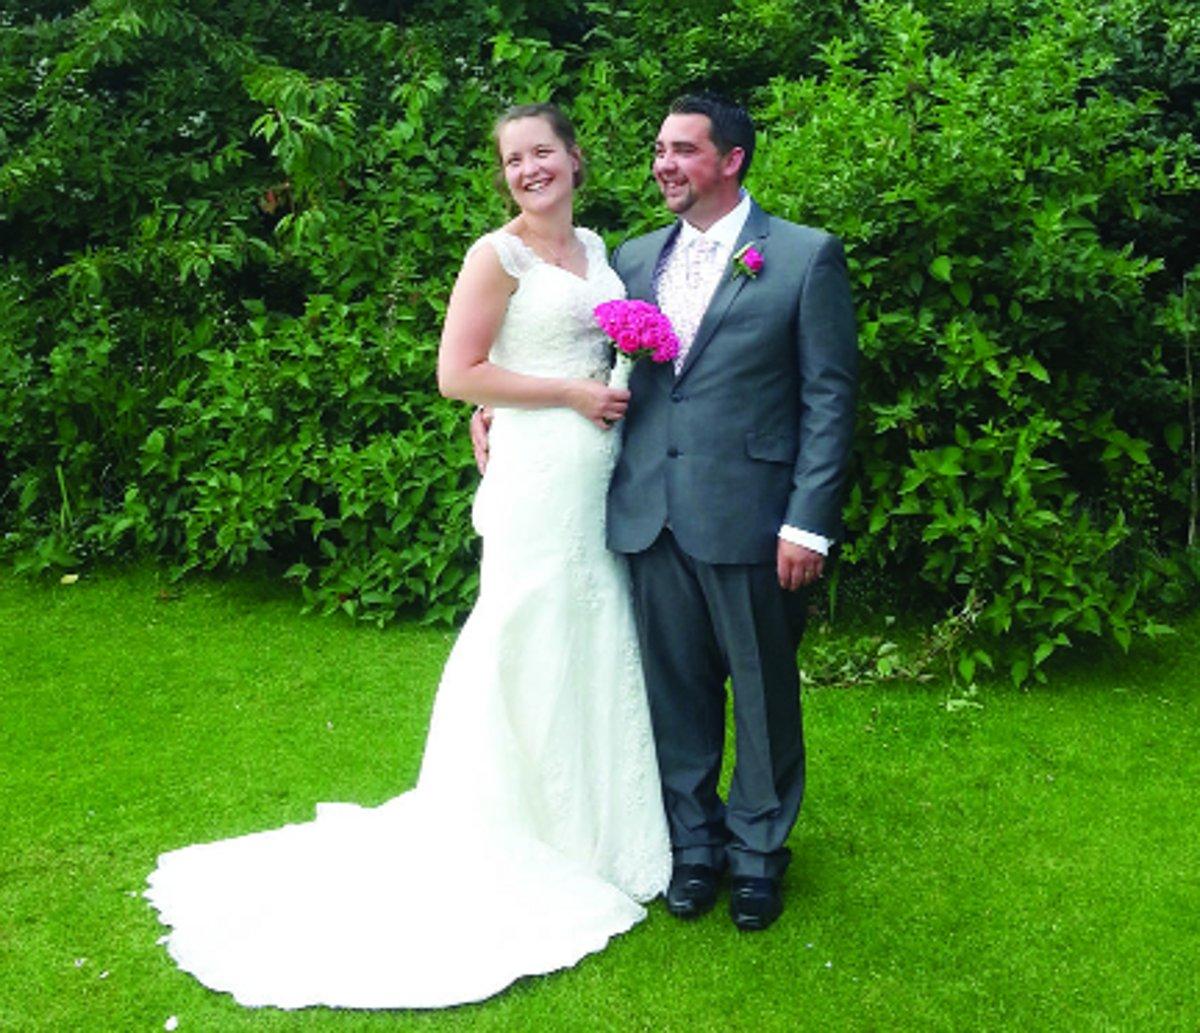 Send us your pictures to pcole@swindonadvertiser.co.uk
Steven Strange and Vanessa Glover were married at Wrag Barn, Highworth  
Picture: Vicky Strange